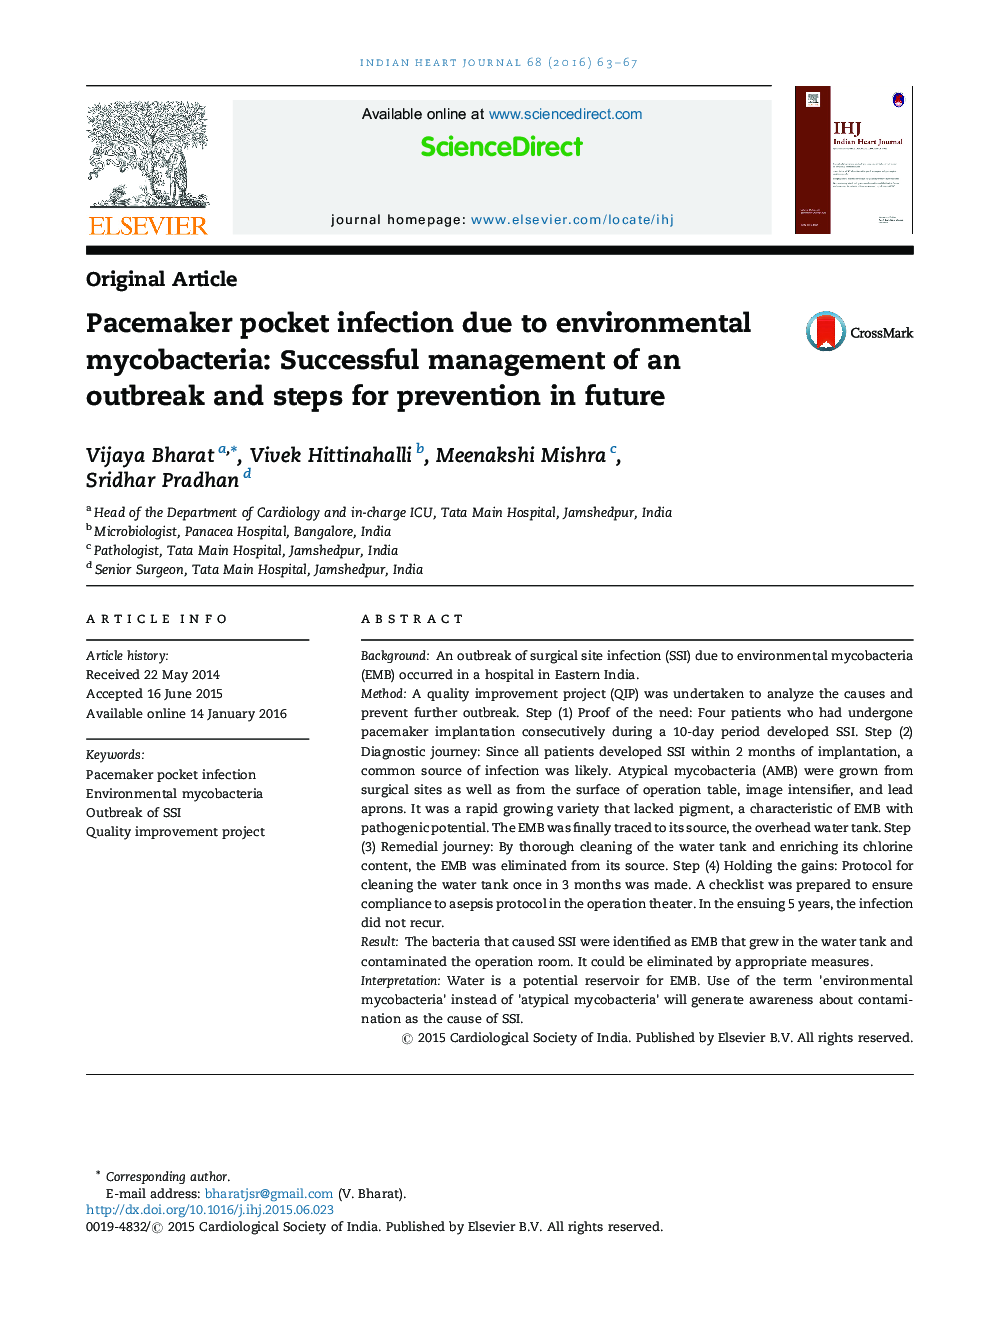 Pacemaker pocket infection due to environmental mycobacteria: Successful management of an outbreak and steps for prevention in future